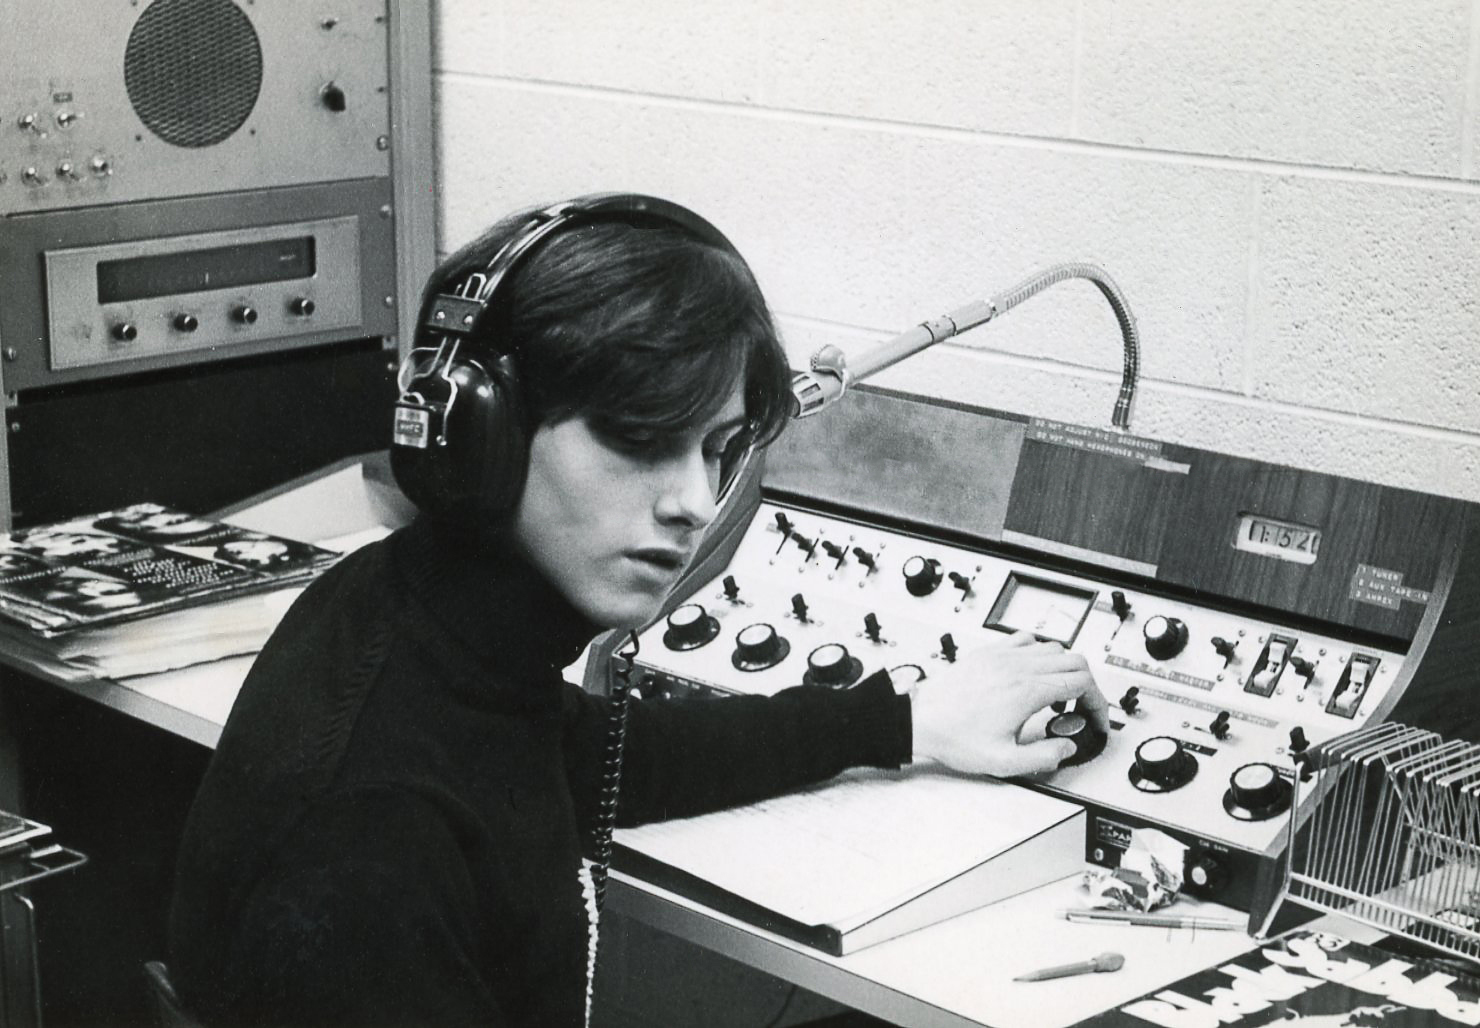 Carlo Martina as a DJ in the College's radio station.